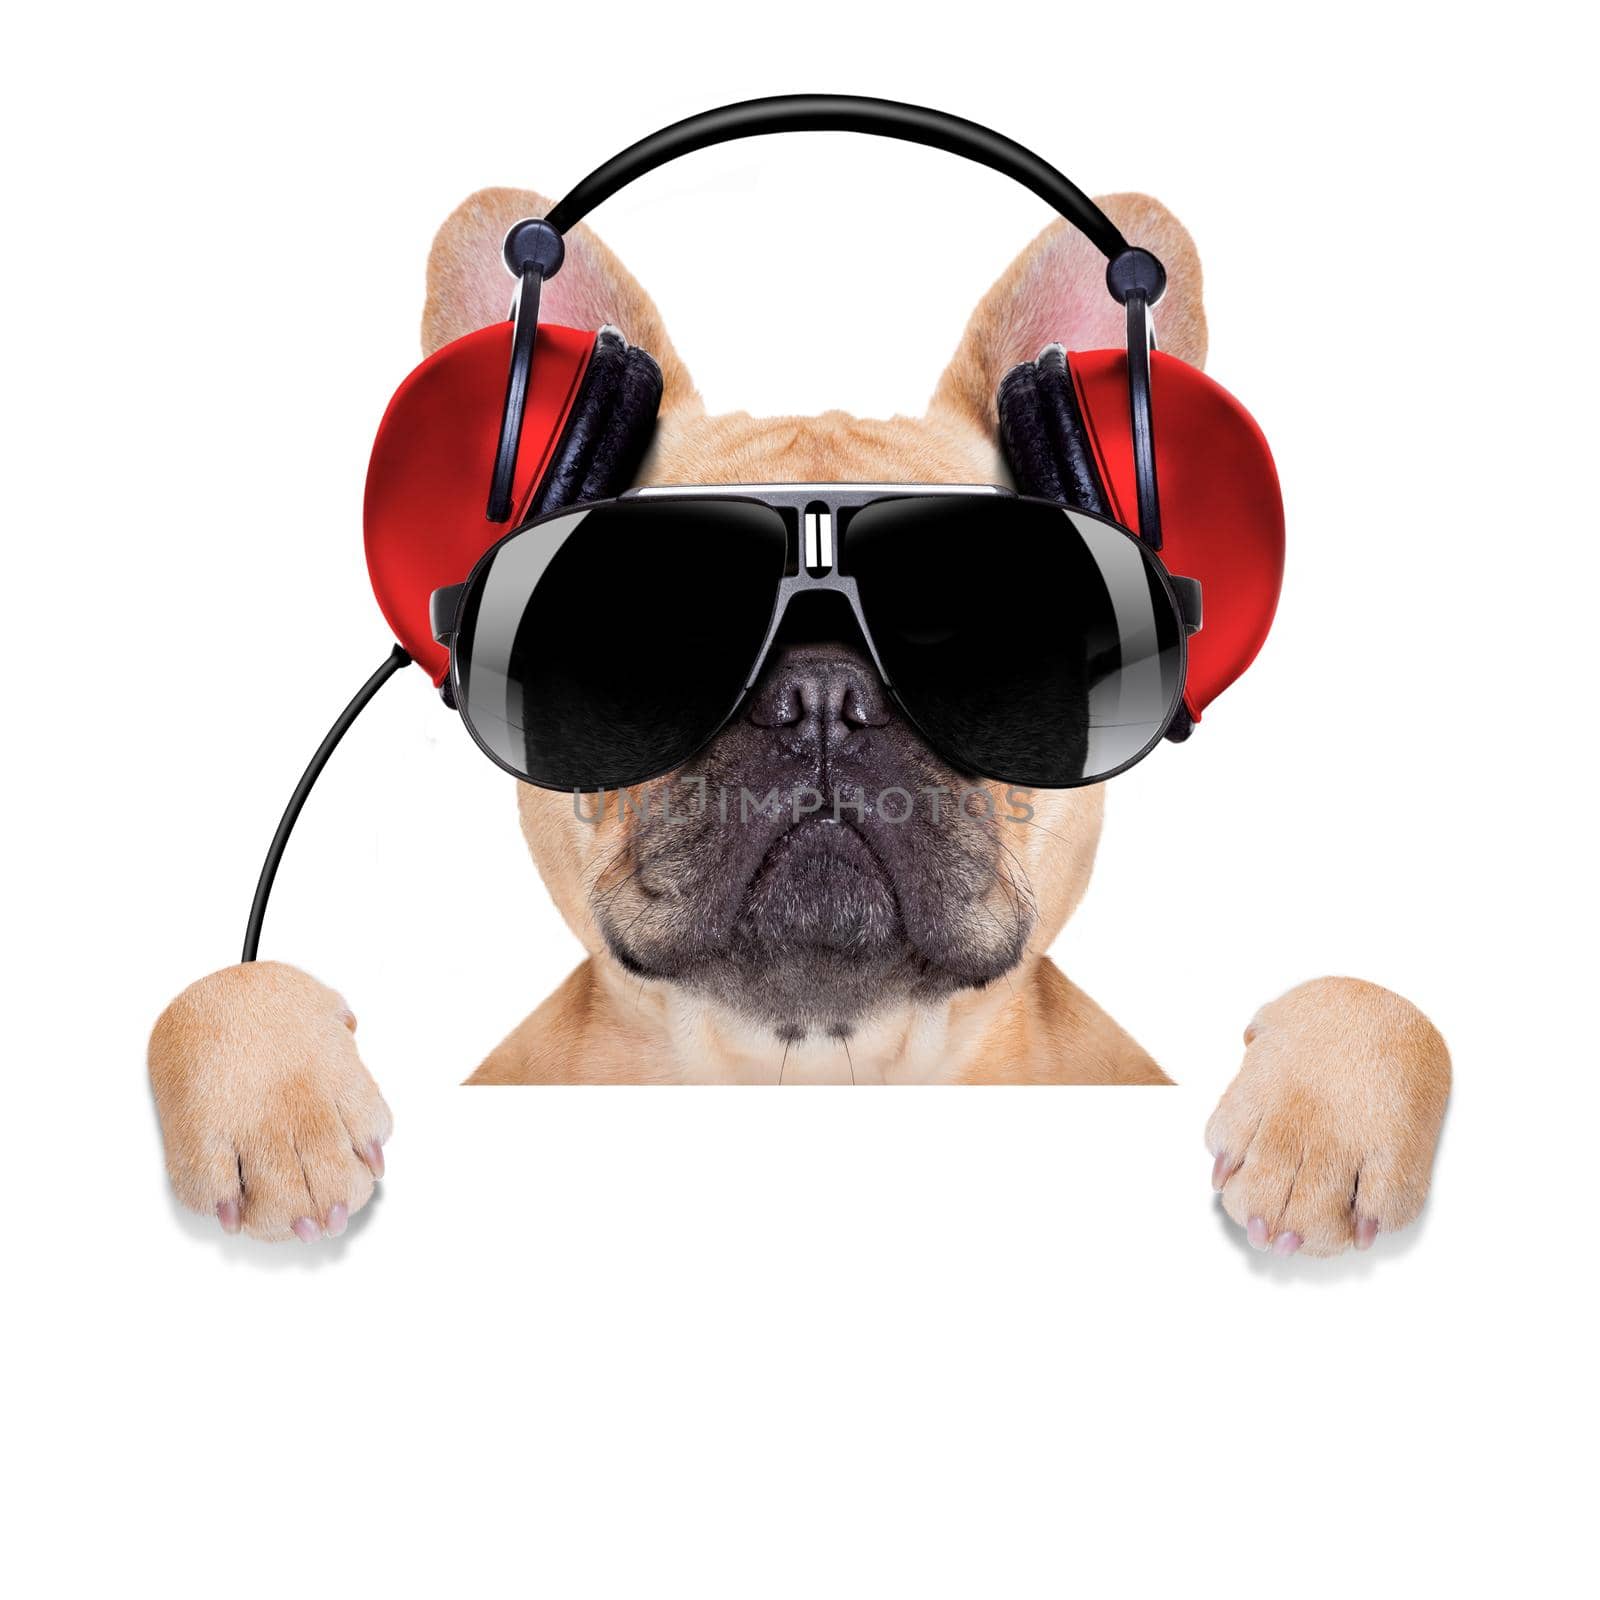 dj bulldog dog with headphones listening to music behind a white banner or placard , isolated on white background